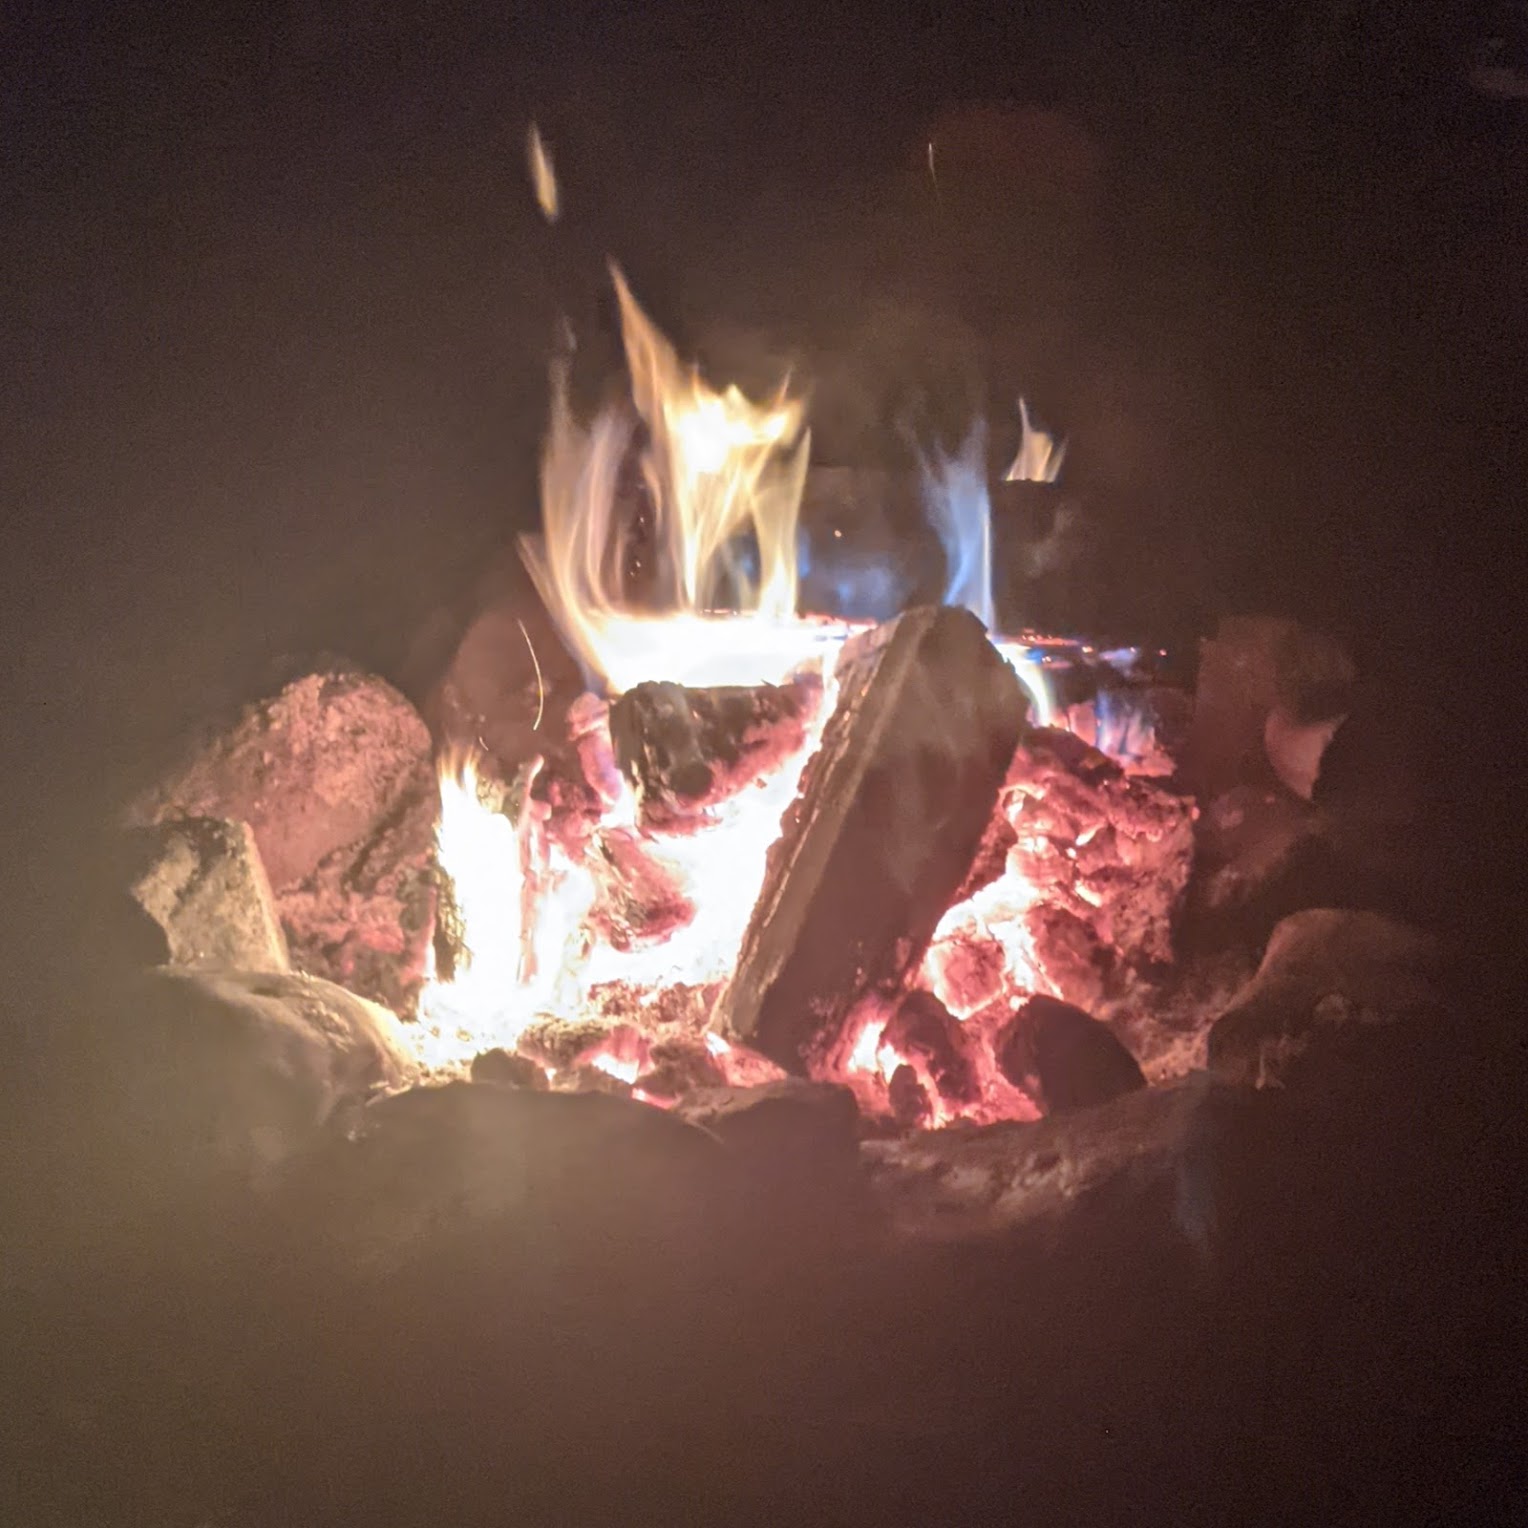 A campfire burning in the night